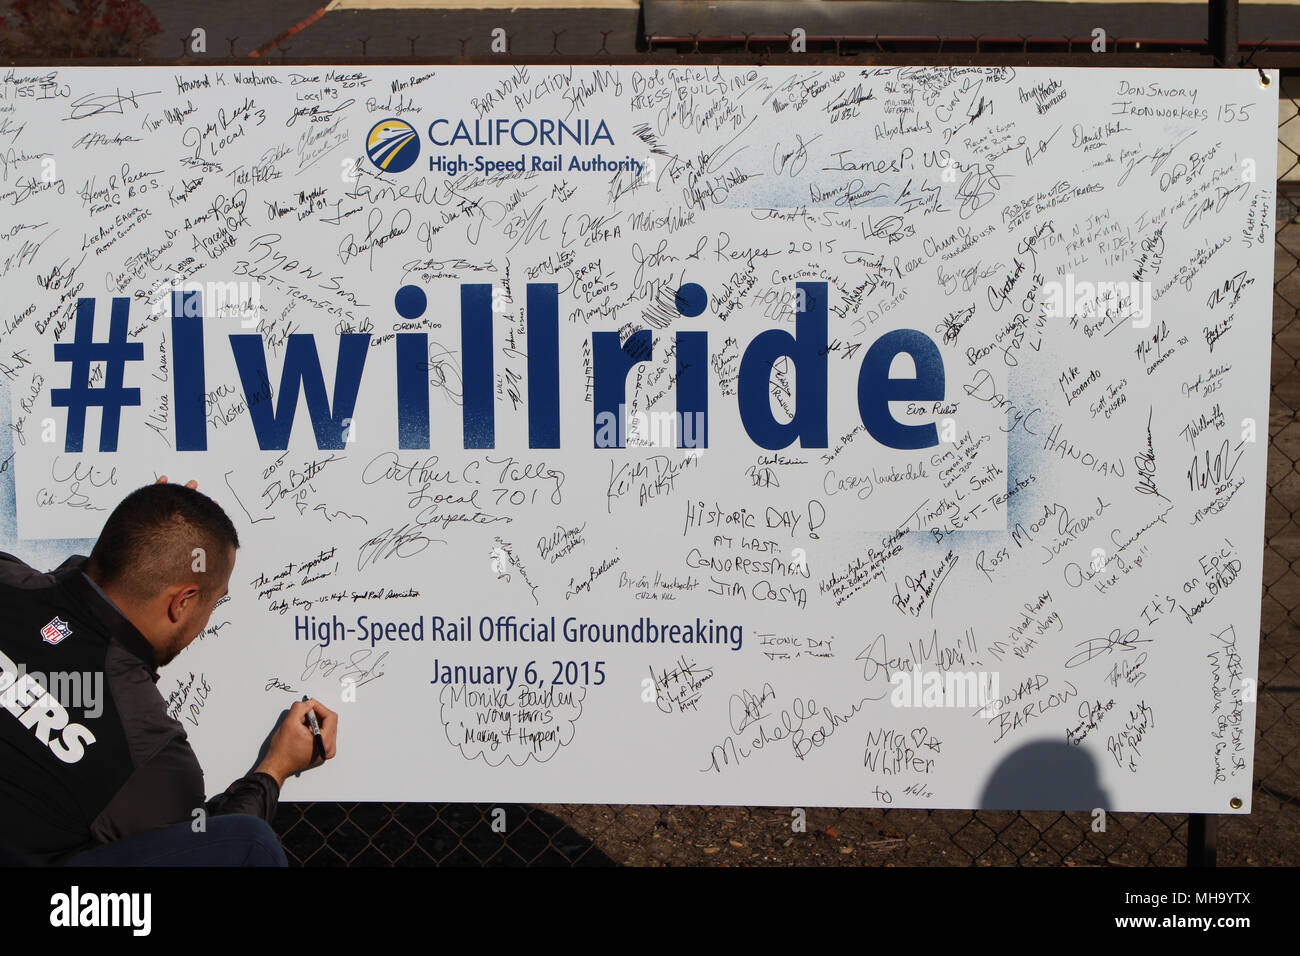 Signing the 'I Will Ride' poster at the California High Speed Rail Groundbreaking Ceremony in Fresno Stock Photo